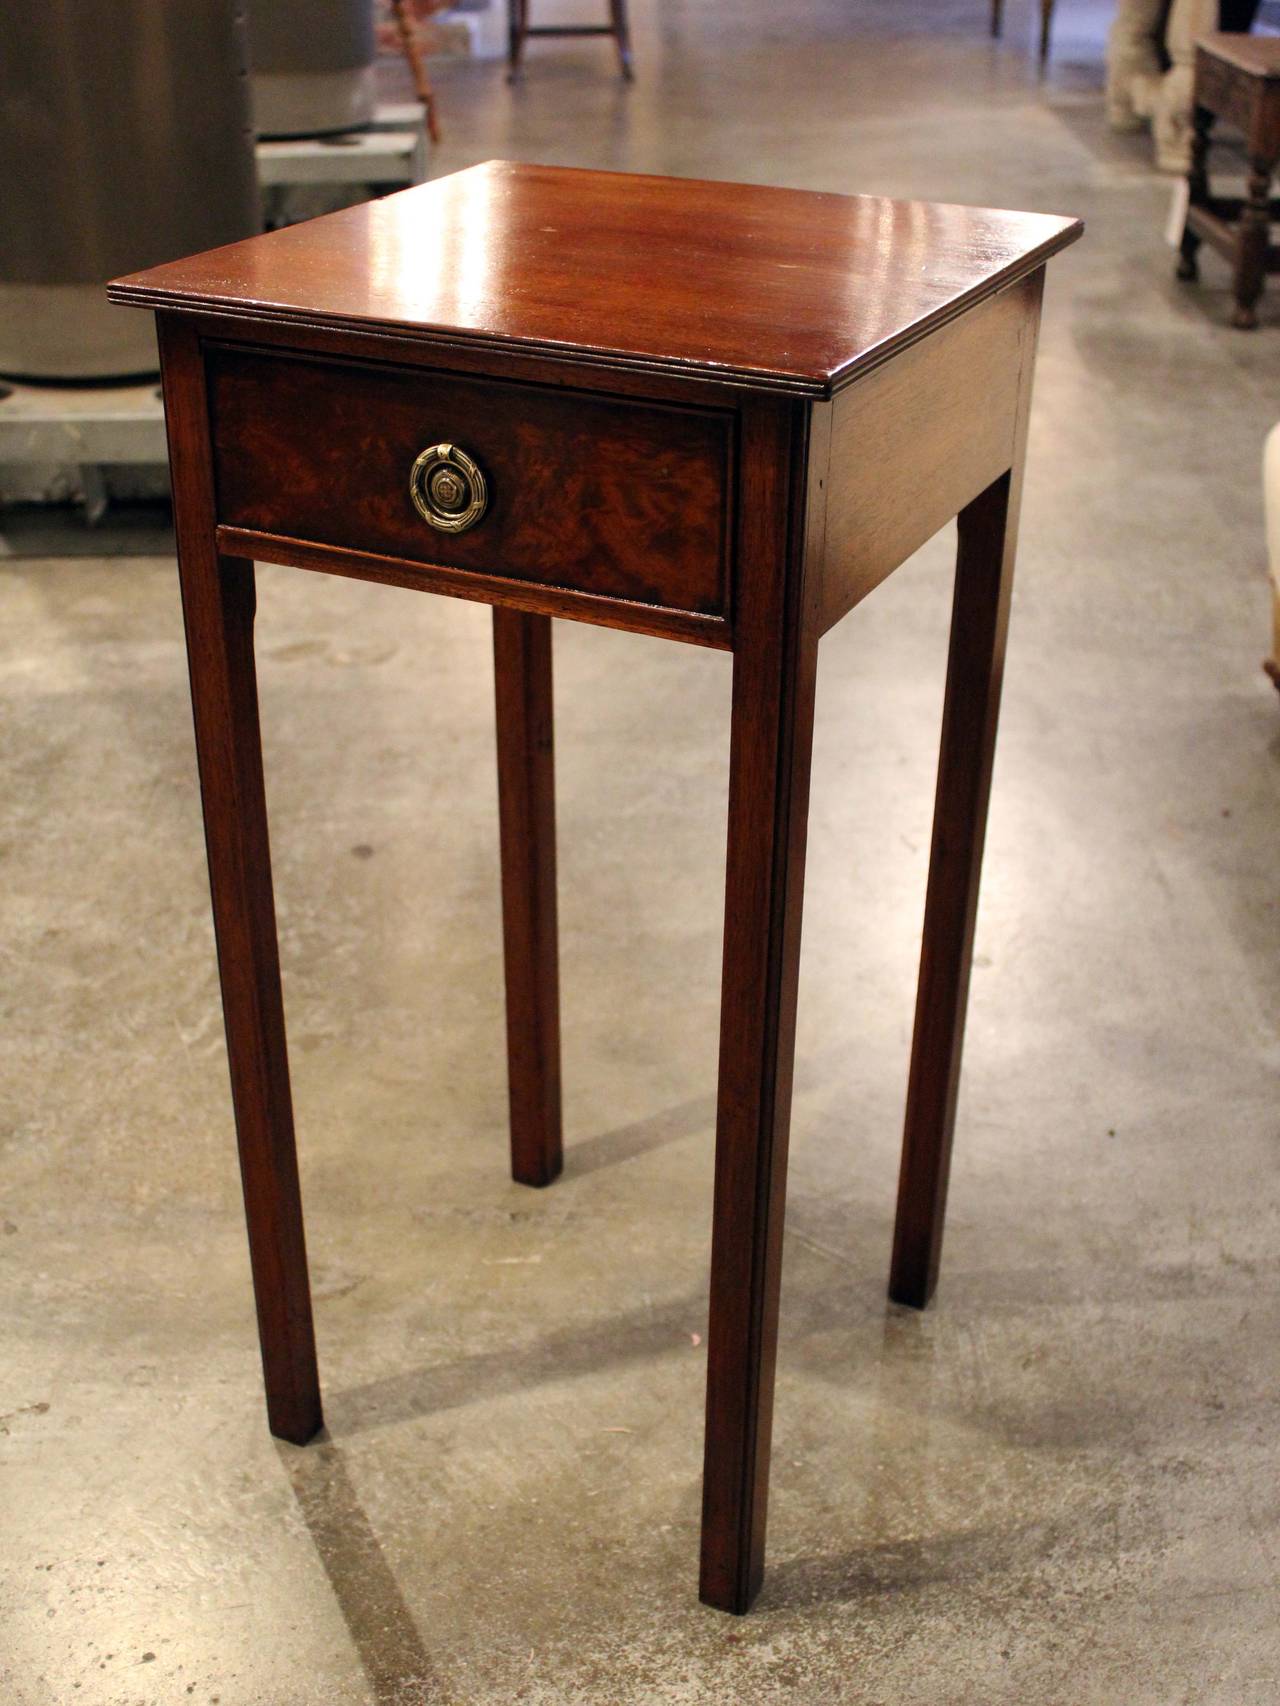 English square mahogany side table with single drawer.